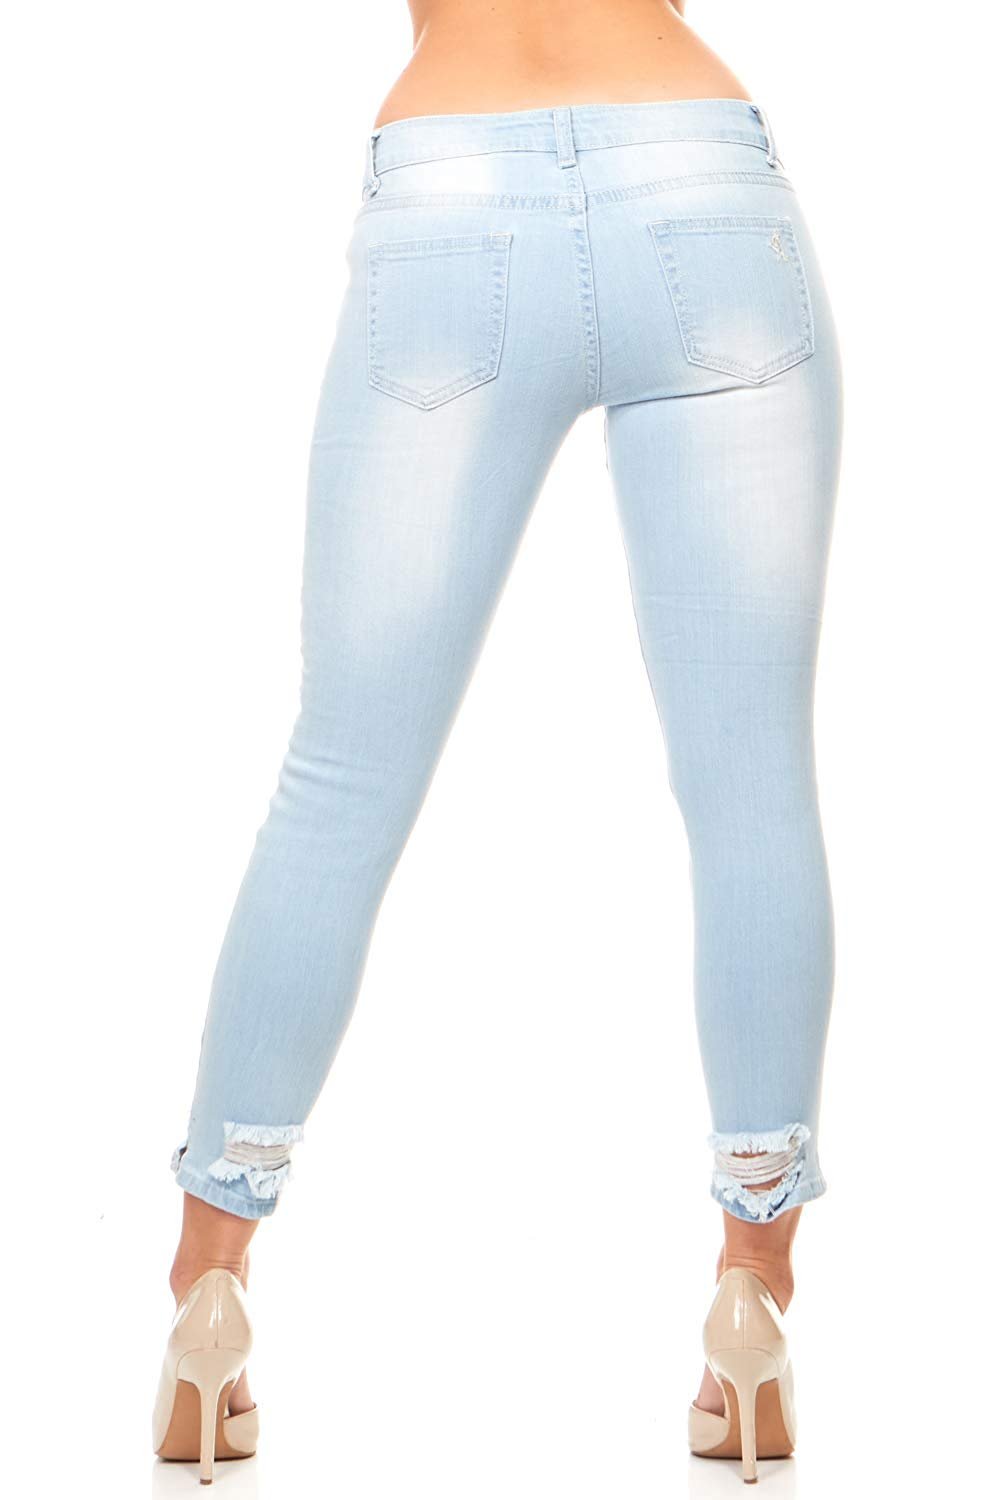 CG JEANS Plus Size Cute Juniors Big Mid Rise Large Ripped Torn Crop Skinny Fit, Sky Blue Denim, 20 - image 2 of 5